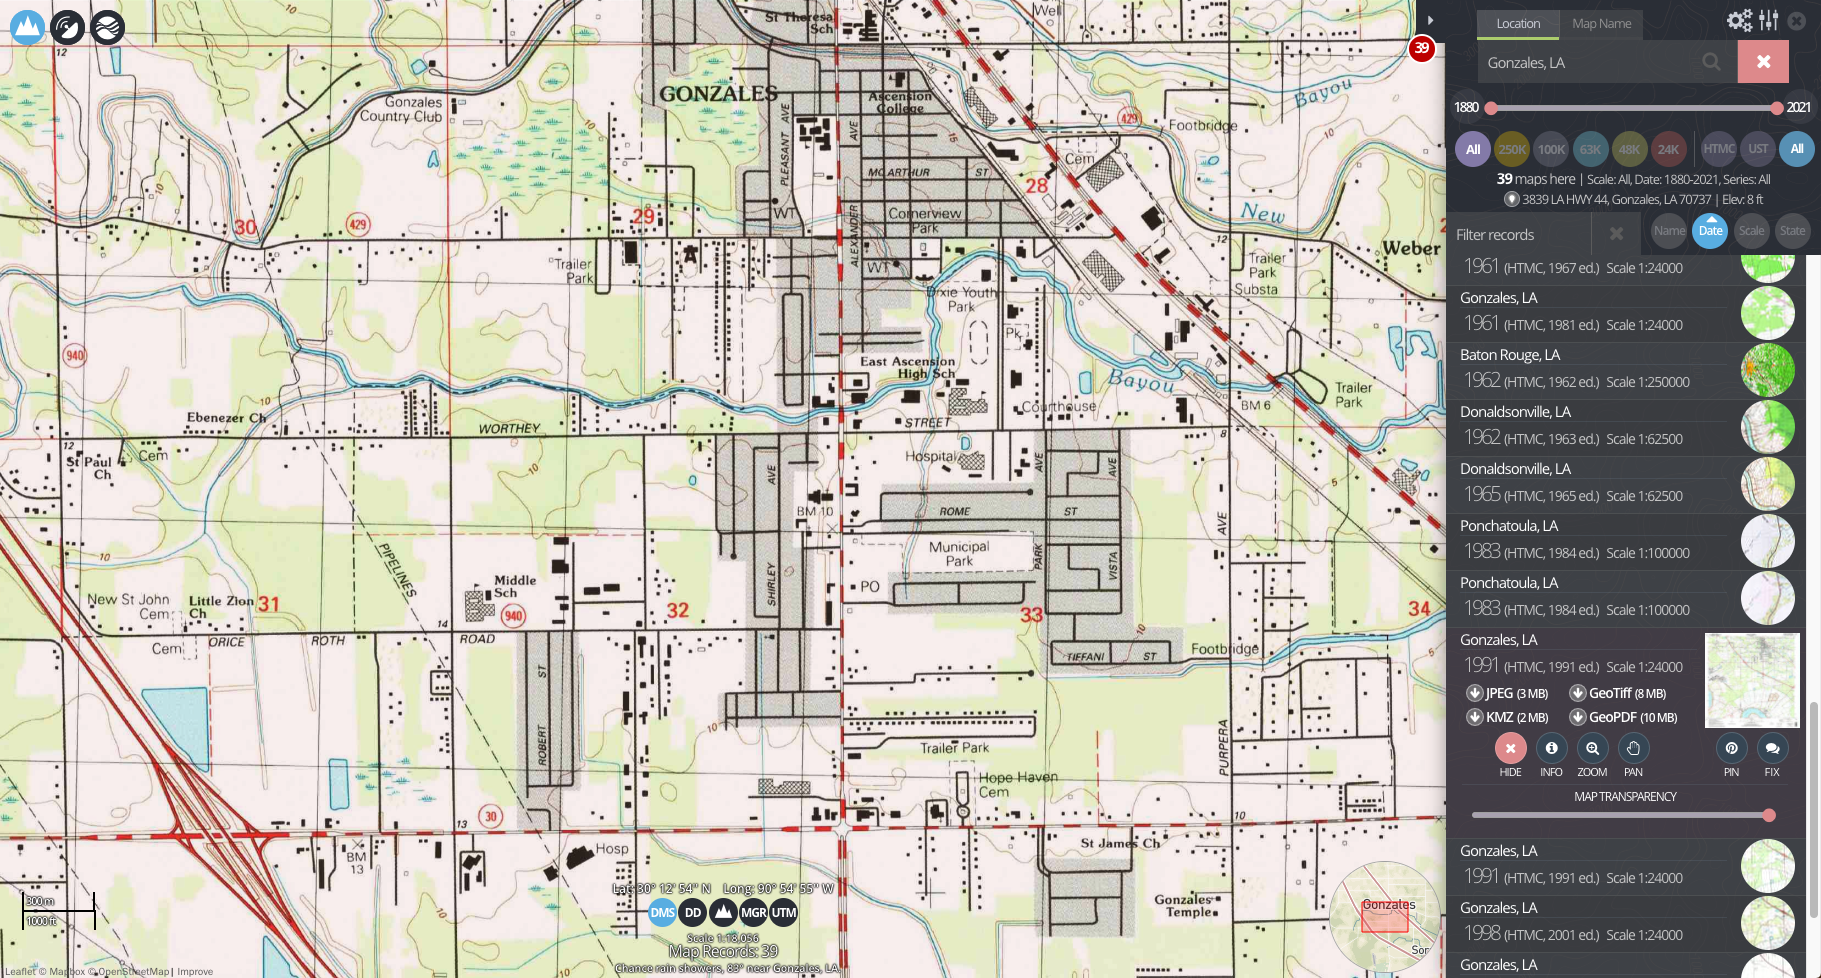 1264-ascekennedy-memorial-high-schooltopo-mapfirst-map-to-show-school1991-16475430291447.png